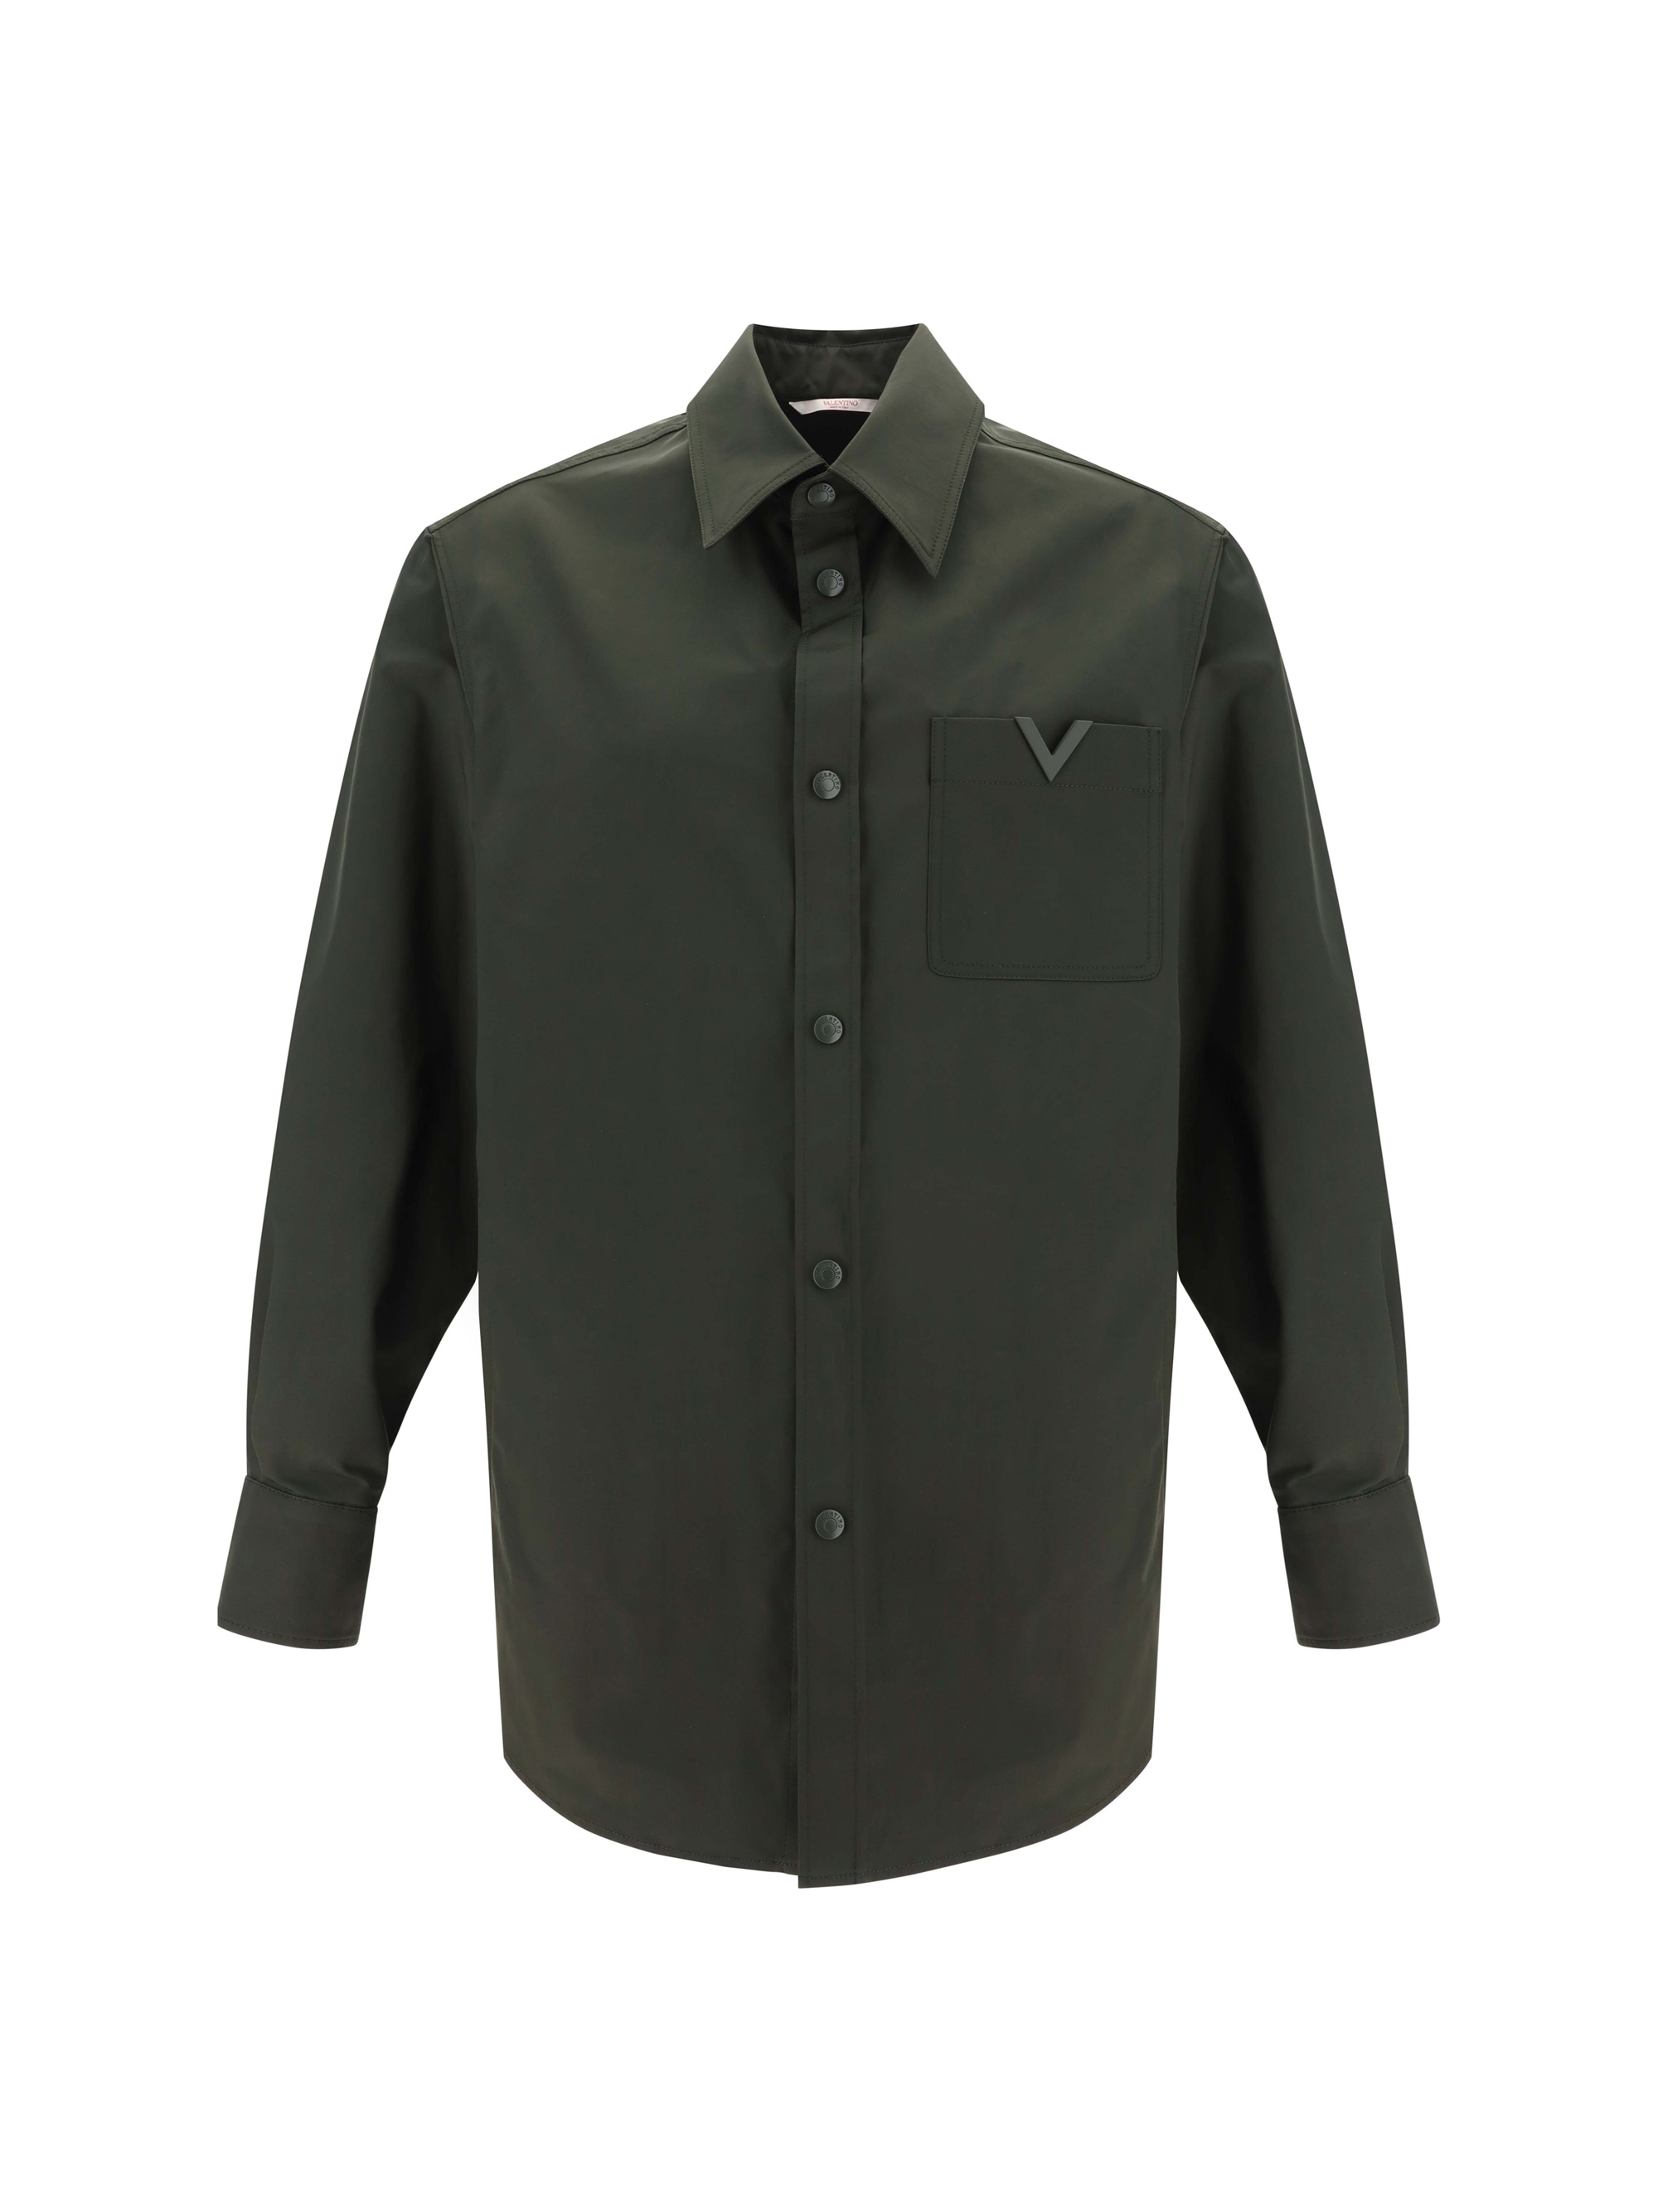 Valentino Pap Shirt In Olive